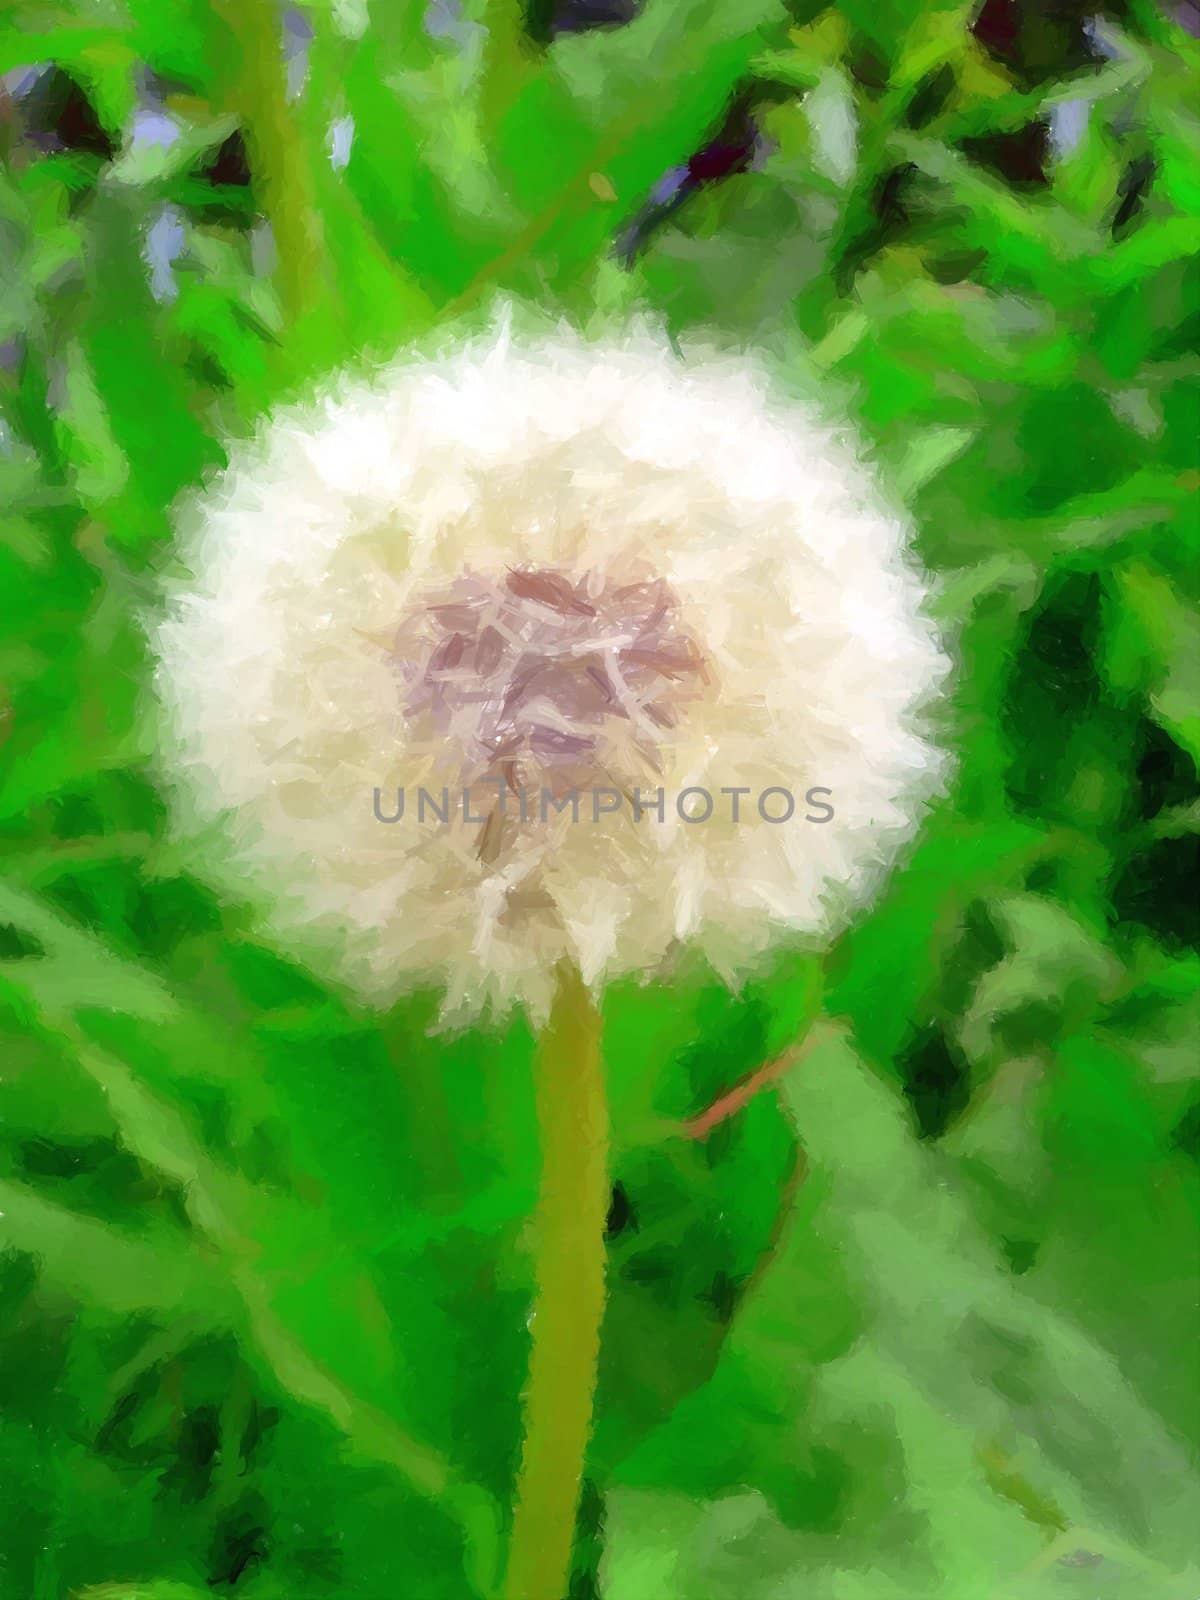 A dandelion in full bloom ready to throw its seeds into the wind.